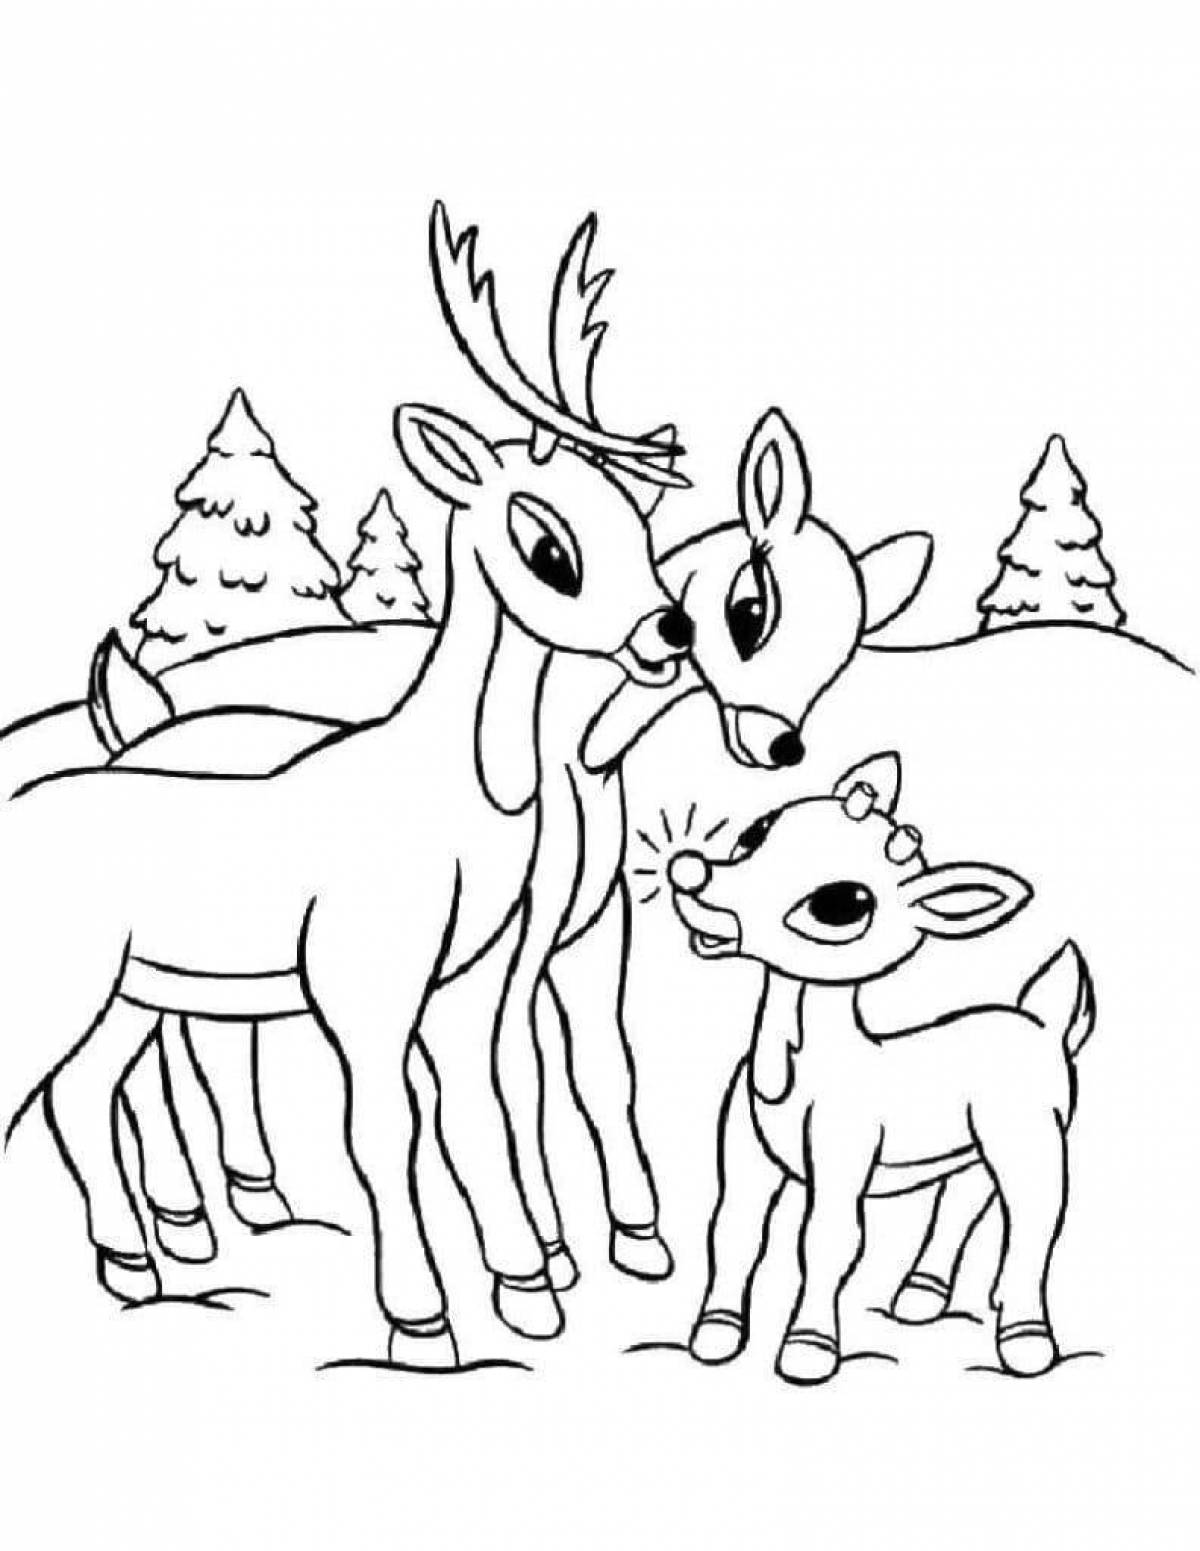 Fairy coloring deer for children 3-4 years old